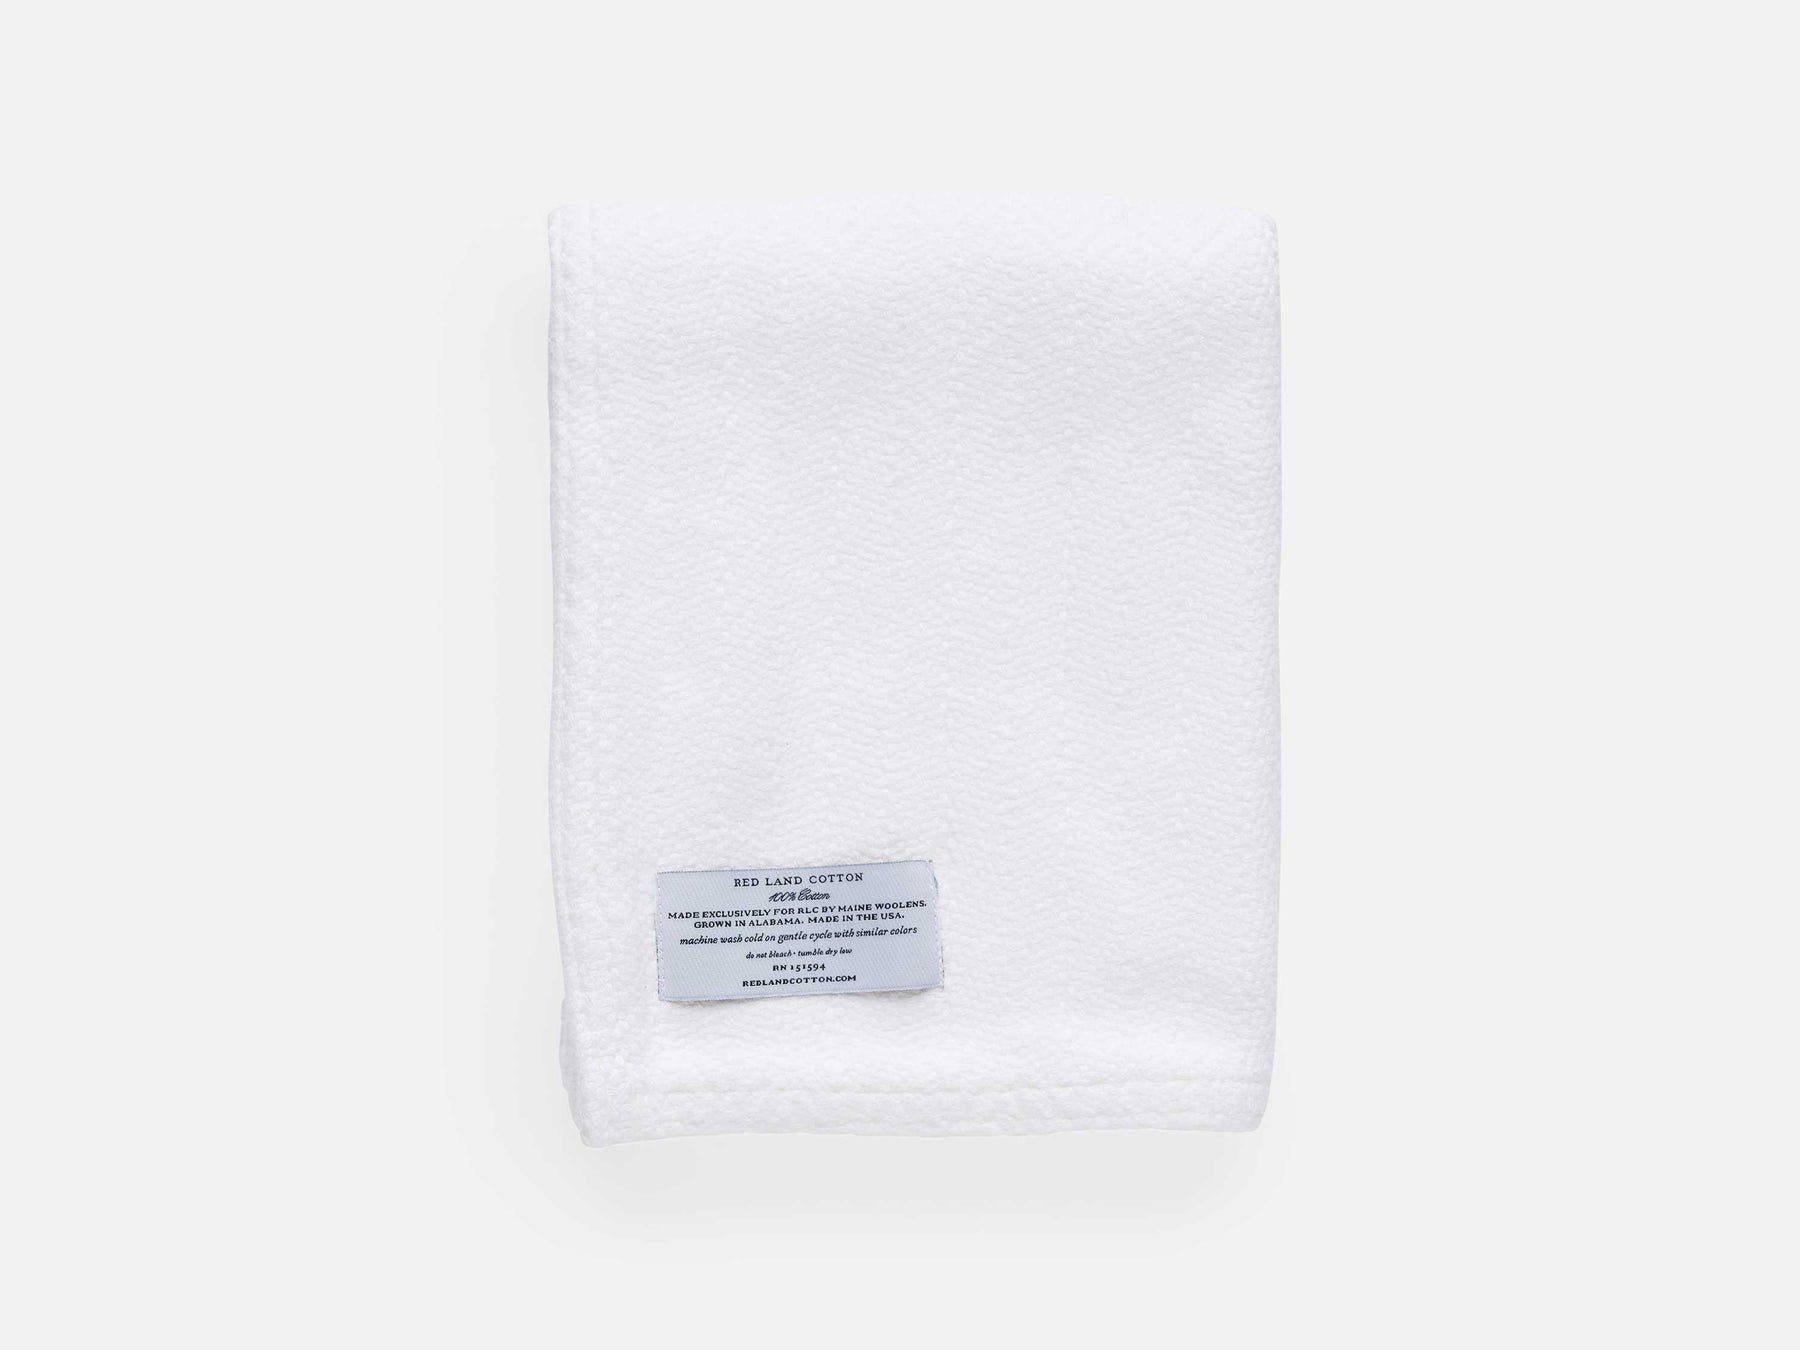 Soft 100% Cotton Bath Towels, Made in USA. - American Blanket Company